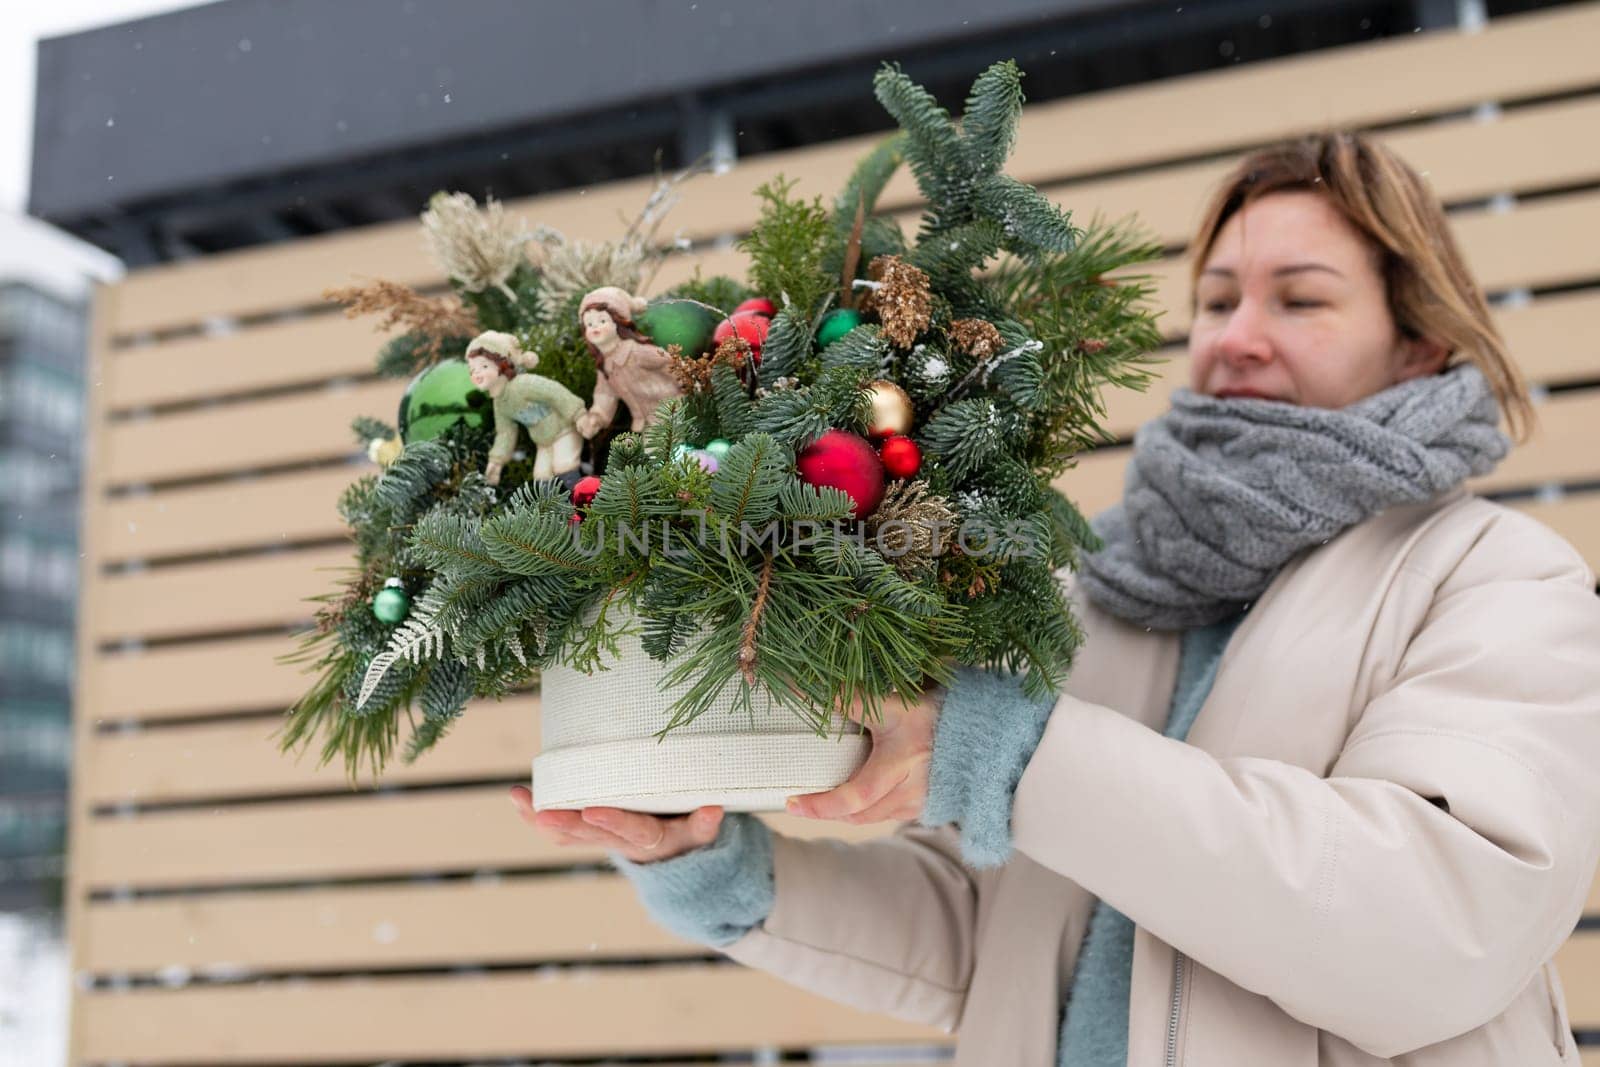 A woman is holding a potted plant decorated with festive Christmas ornaments. She is standing indoors, showcasing the seasonal display of greenery and holiday decorations.